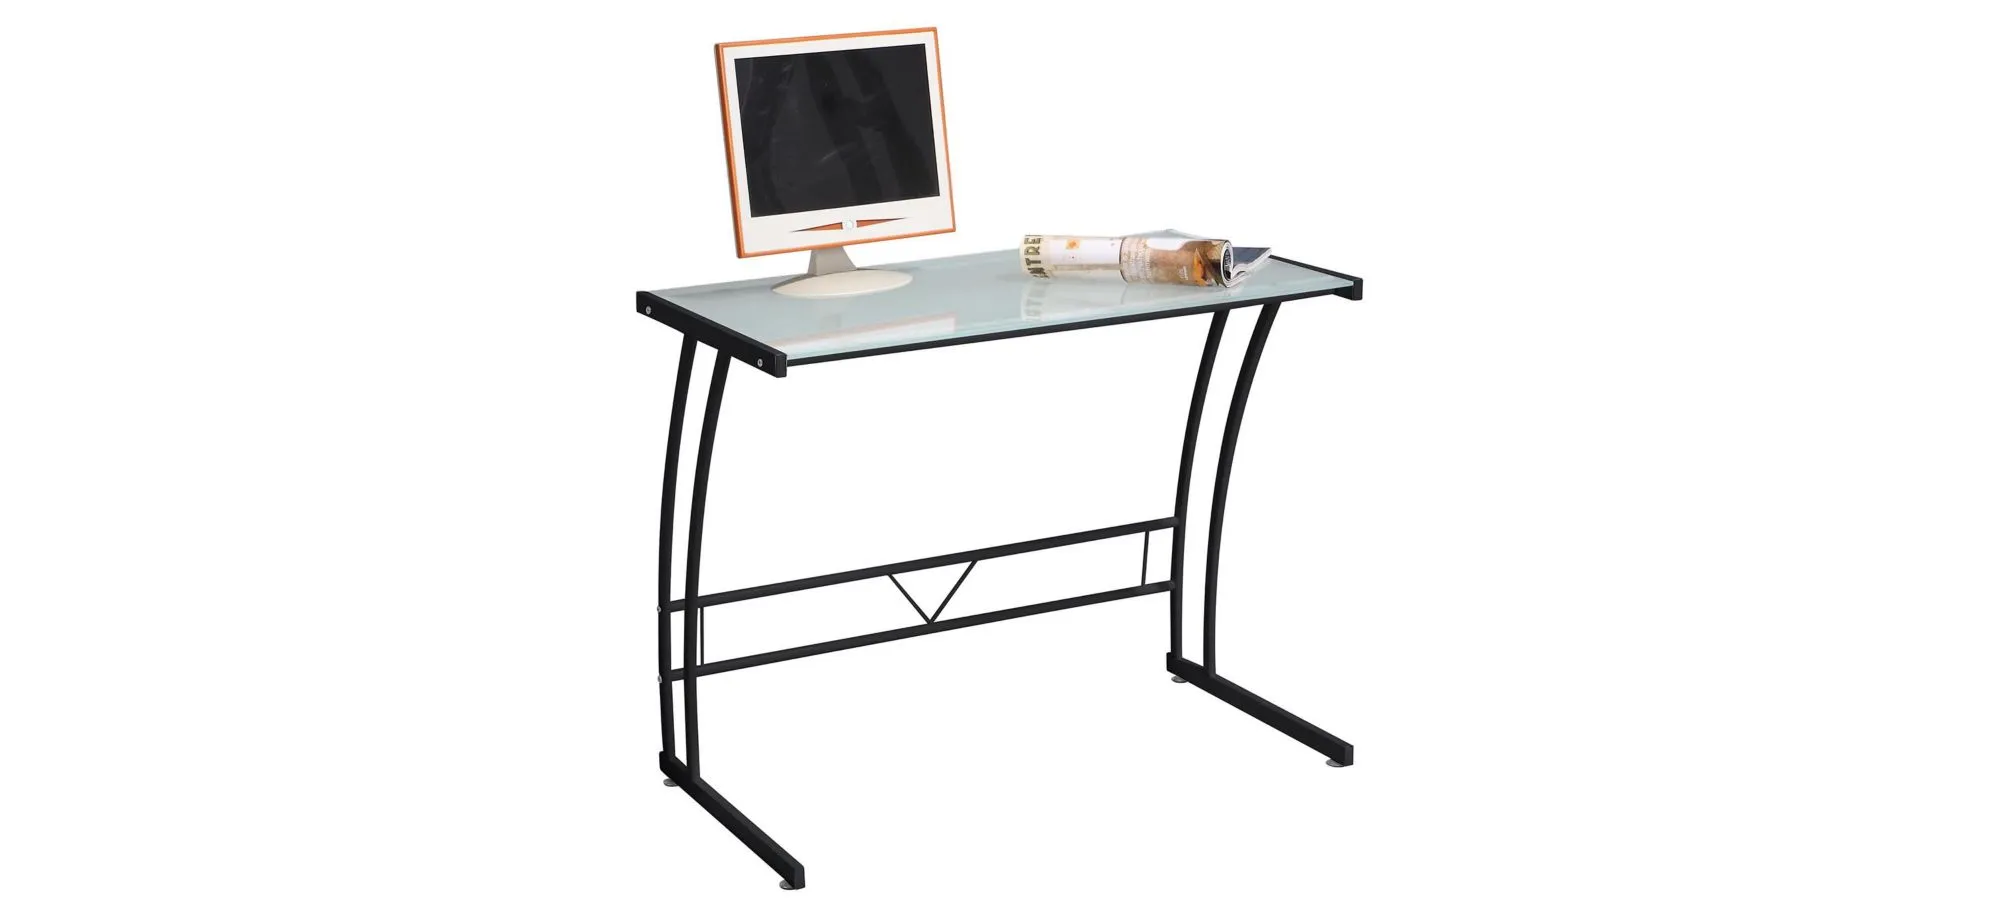 Sigma Computer Desk in White / Black Frame by Lumisource